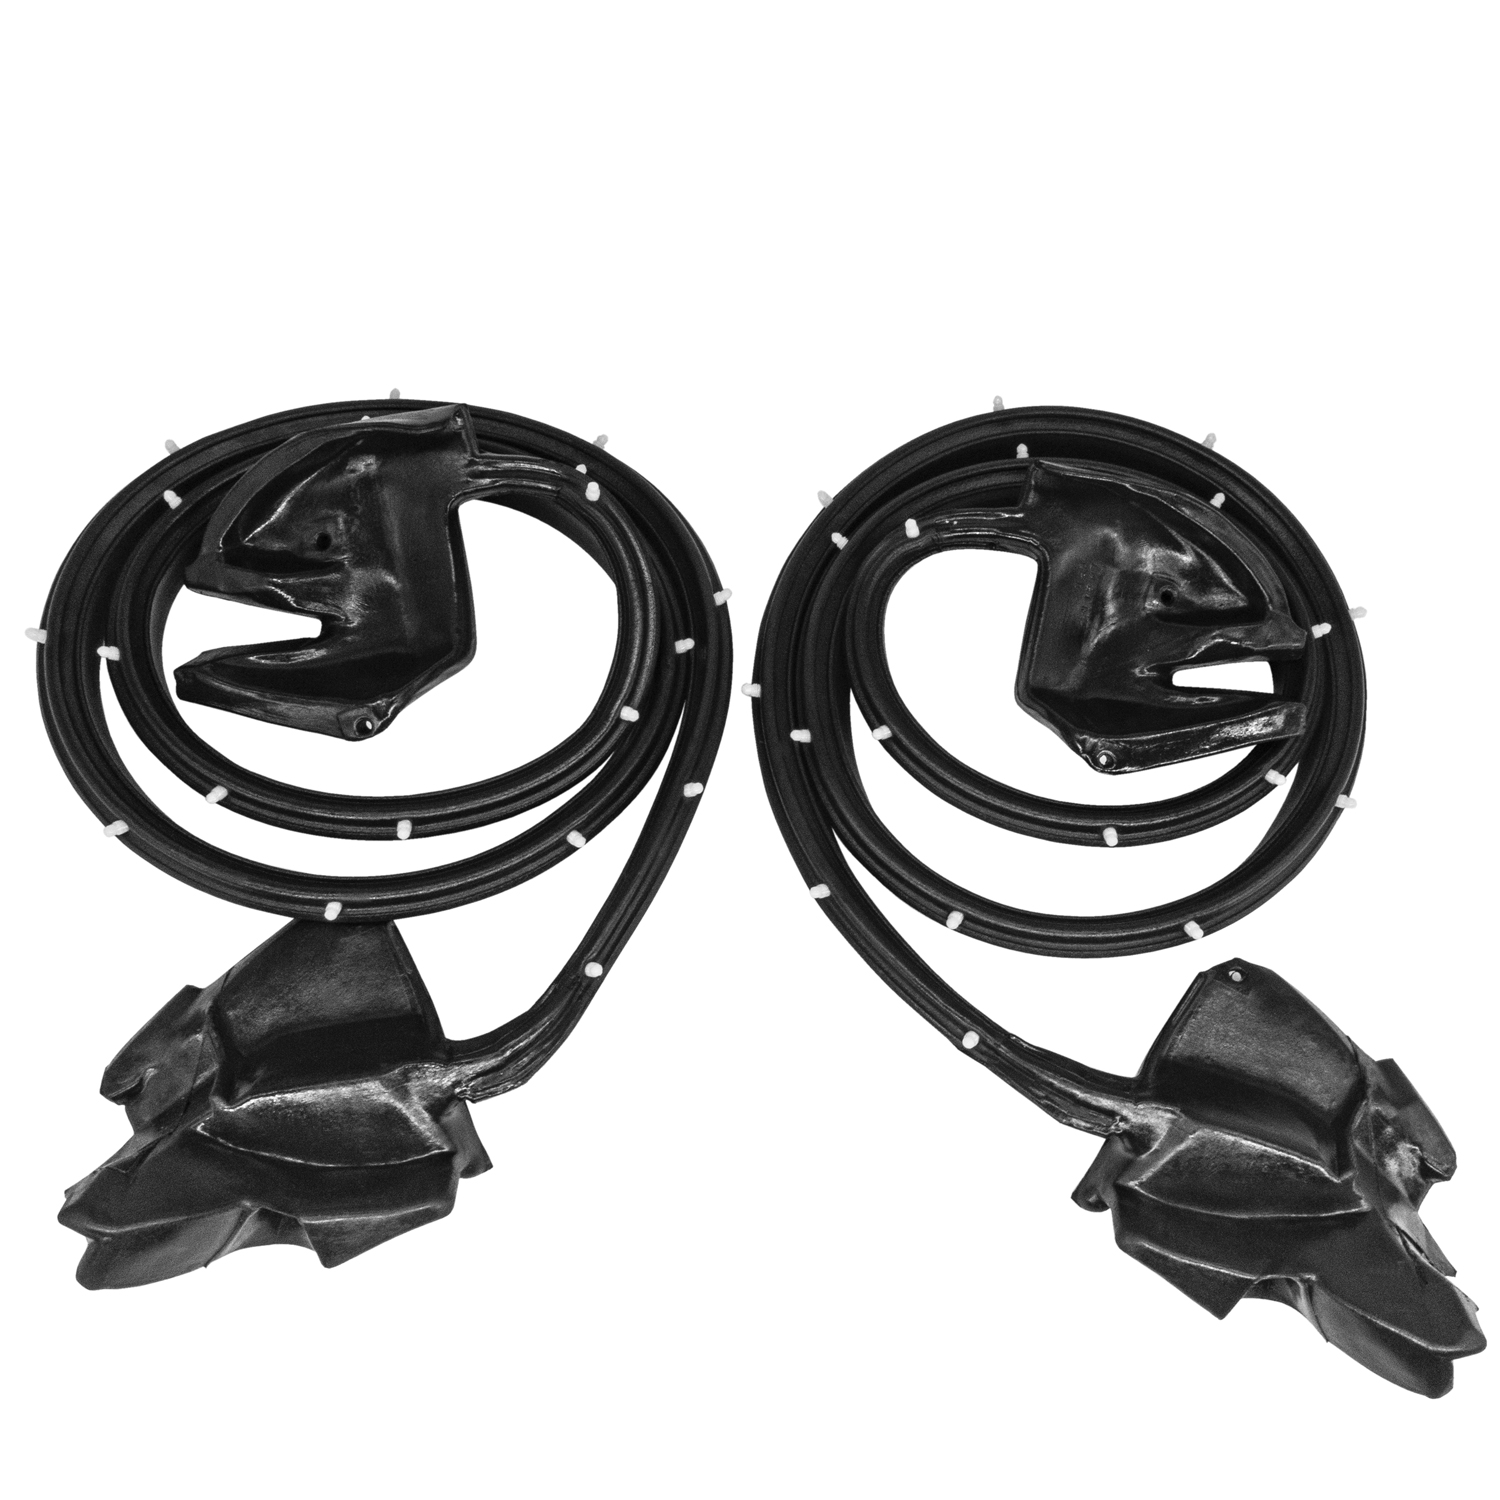 1972 Buick Electra Molded Door Seal with Clips, Pair-LM 21-R